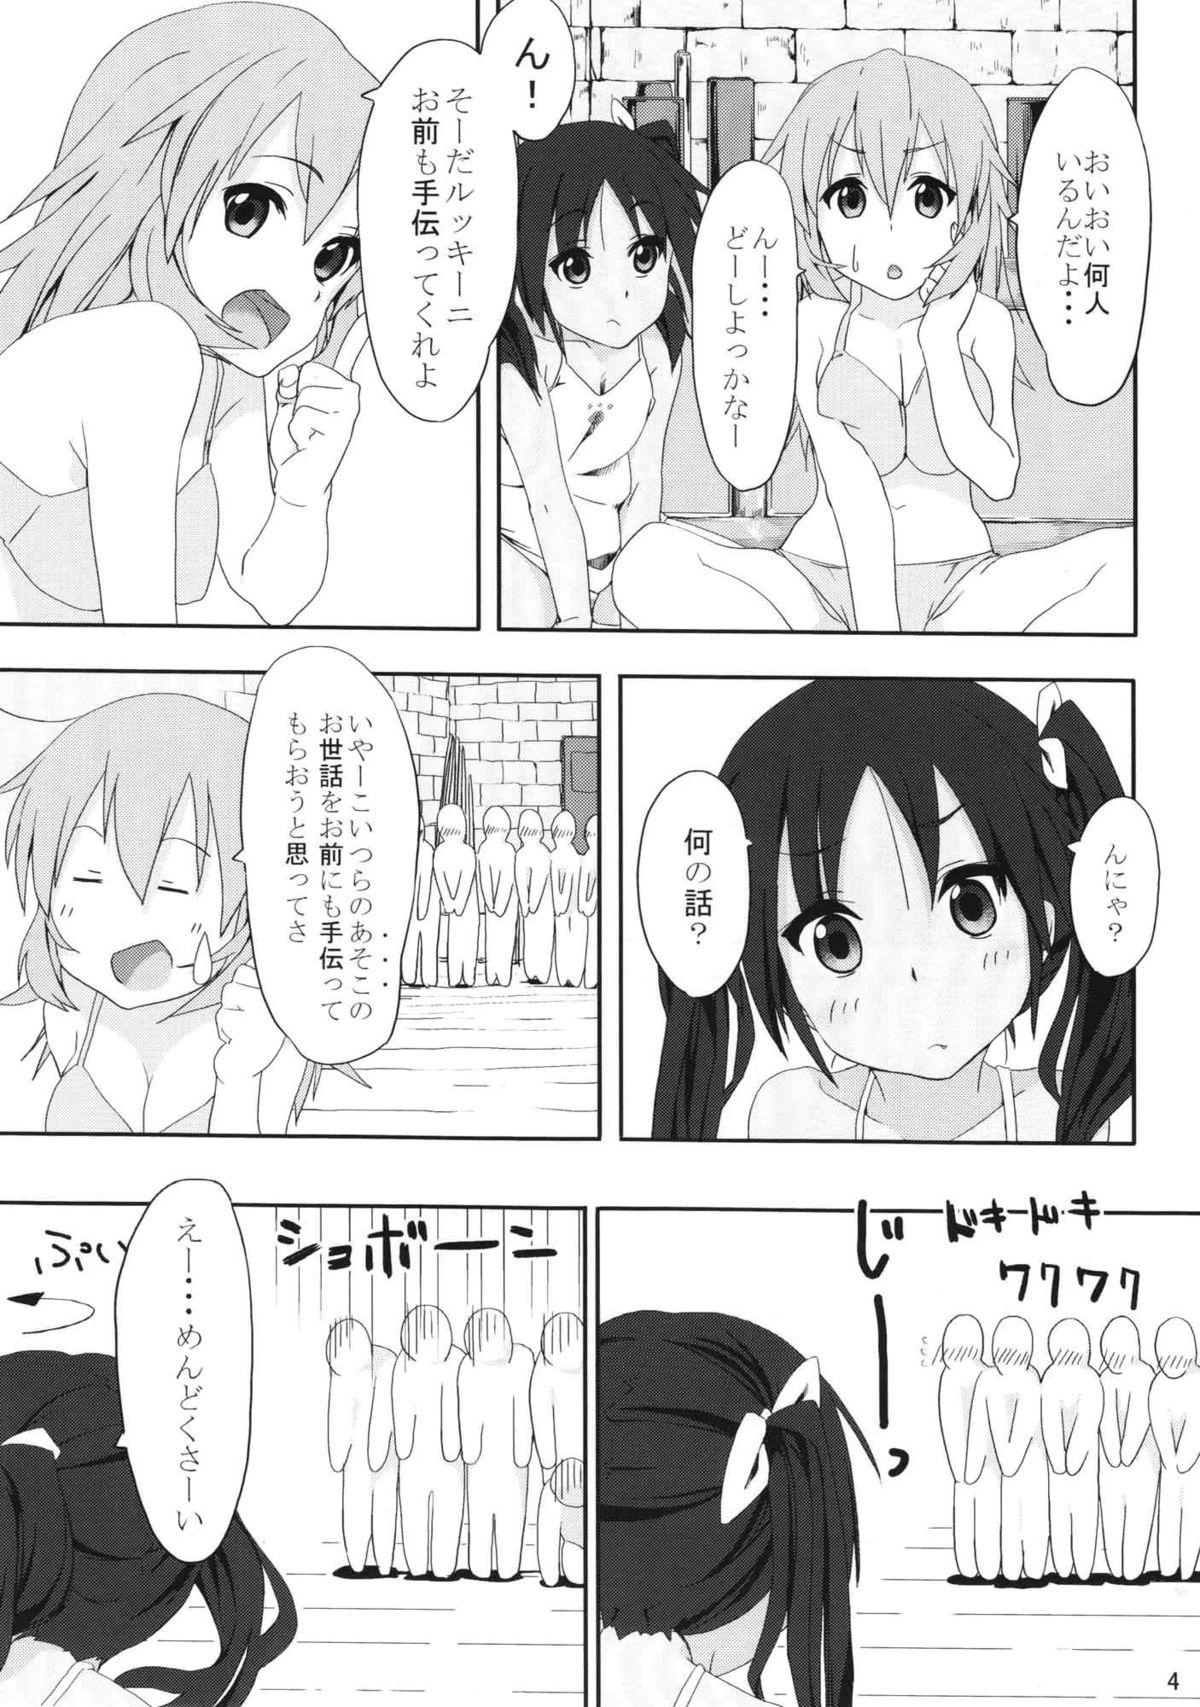 White Chick Shirley to Lucchini no Gohoushi Hon - Strike witches Gaygroup - Page 3